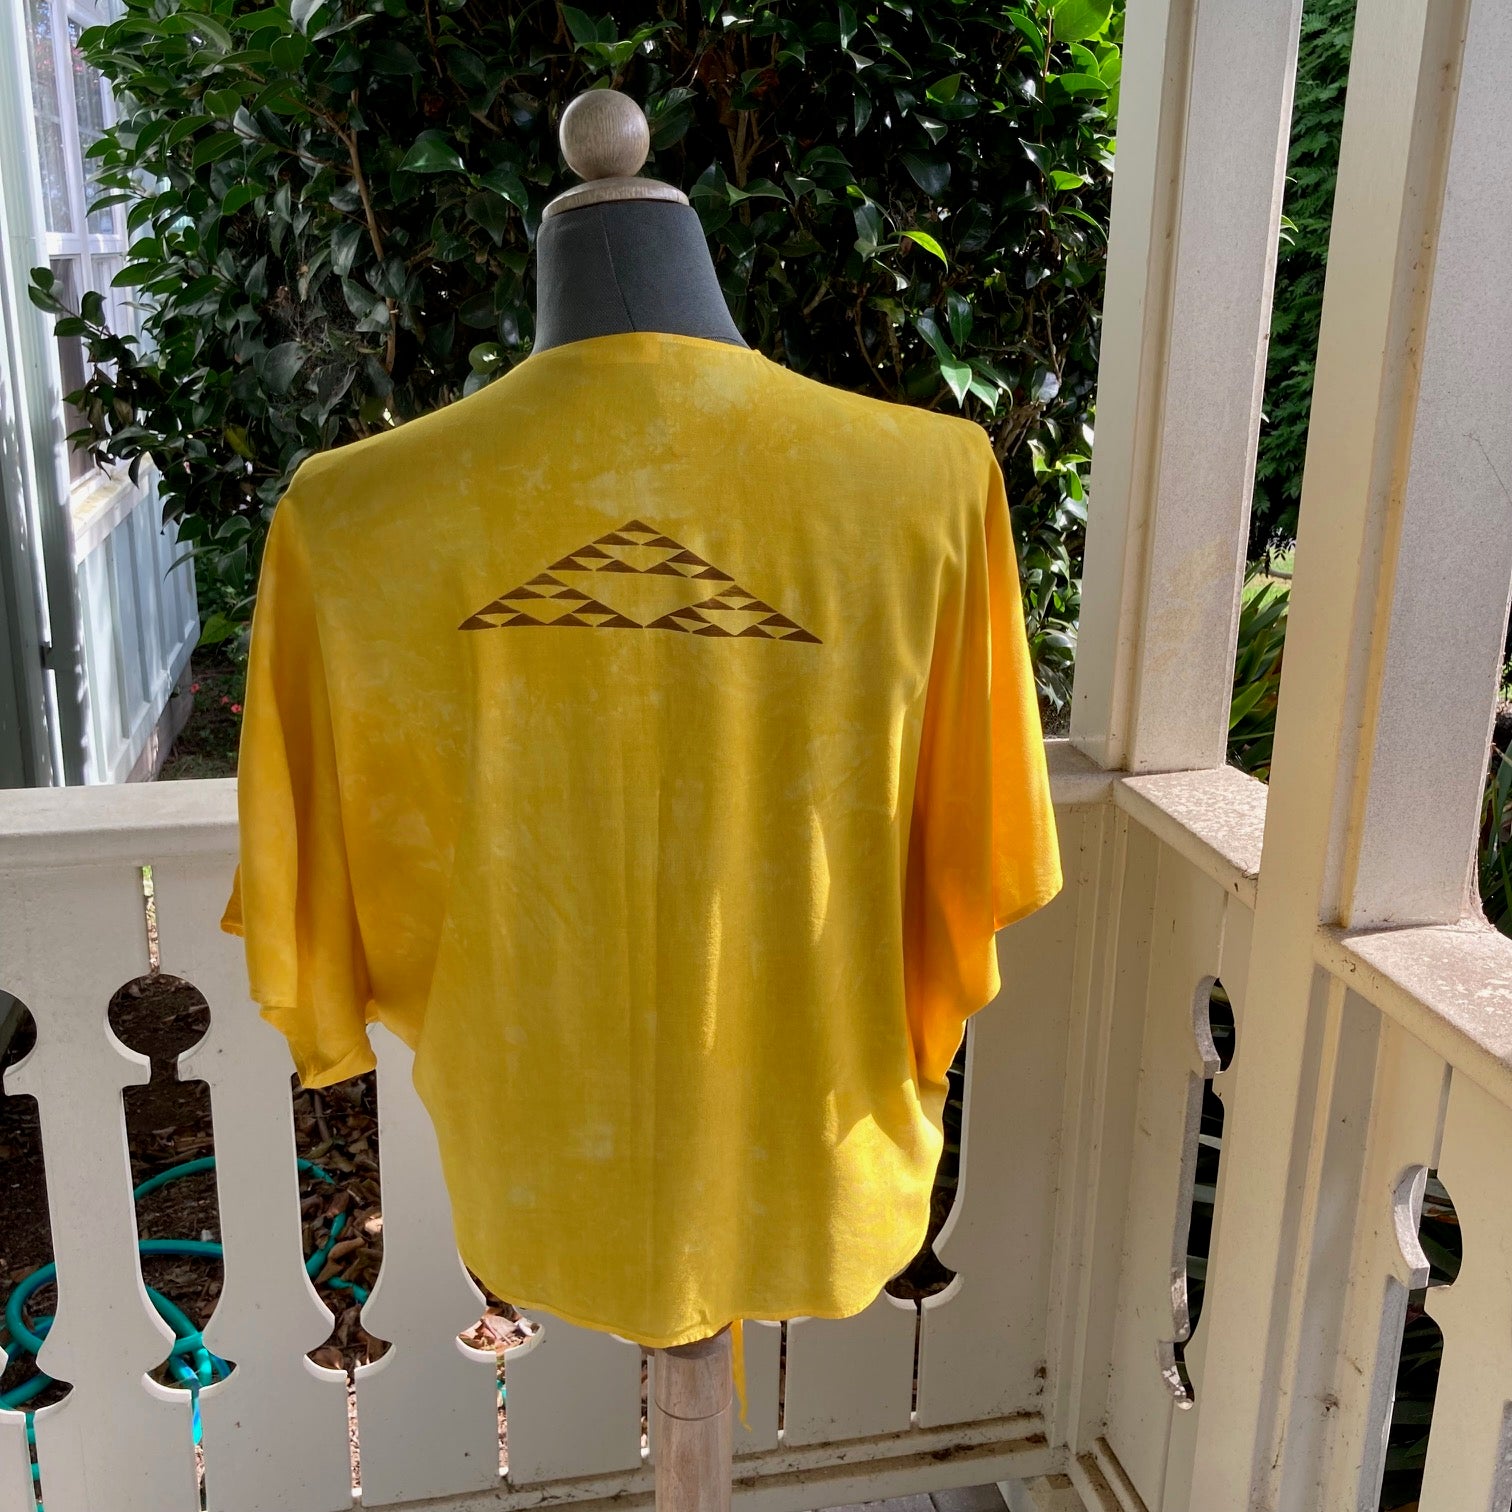 Ohe Kapala TIE Blouse in Yellow with Mauna and Lehua